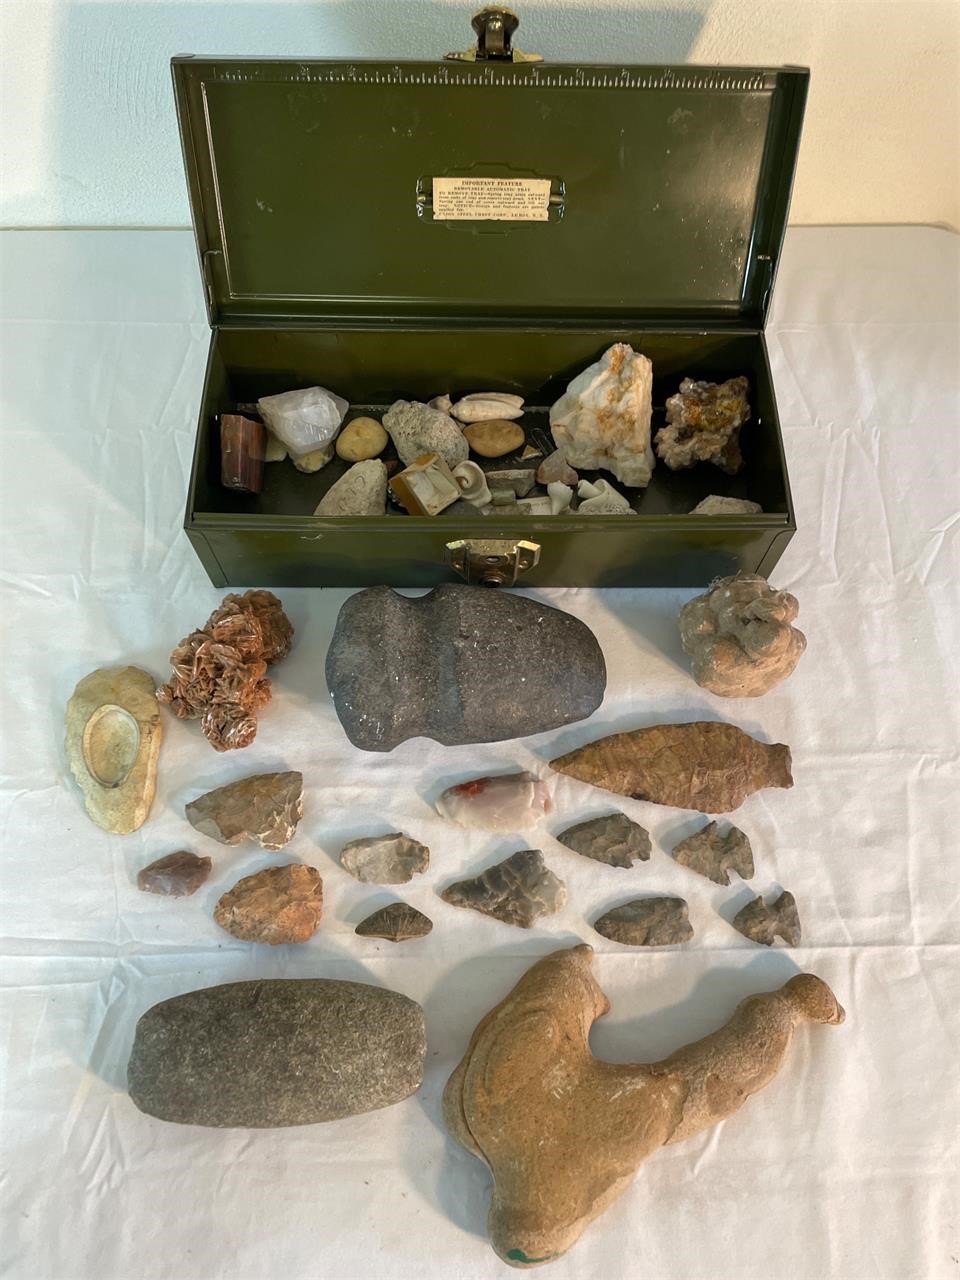 Ancient stone tool, arrow heads, and stones